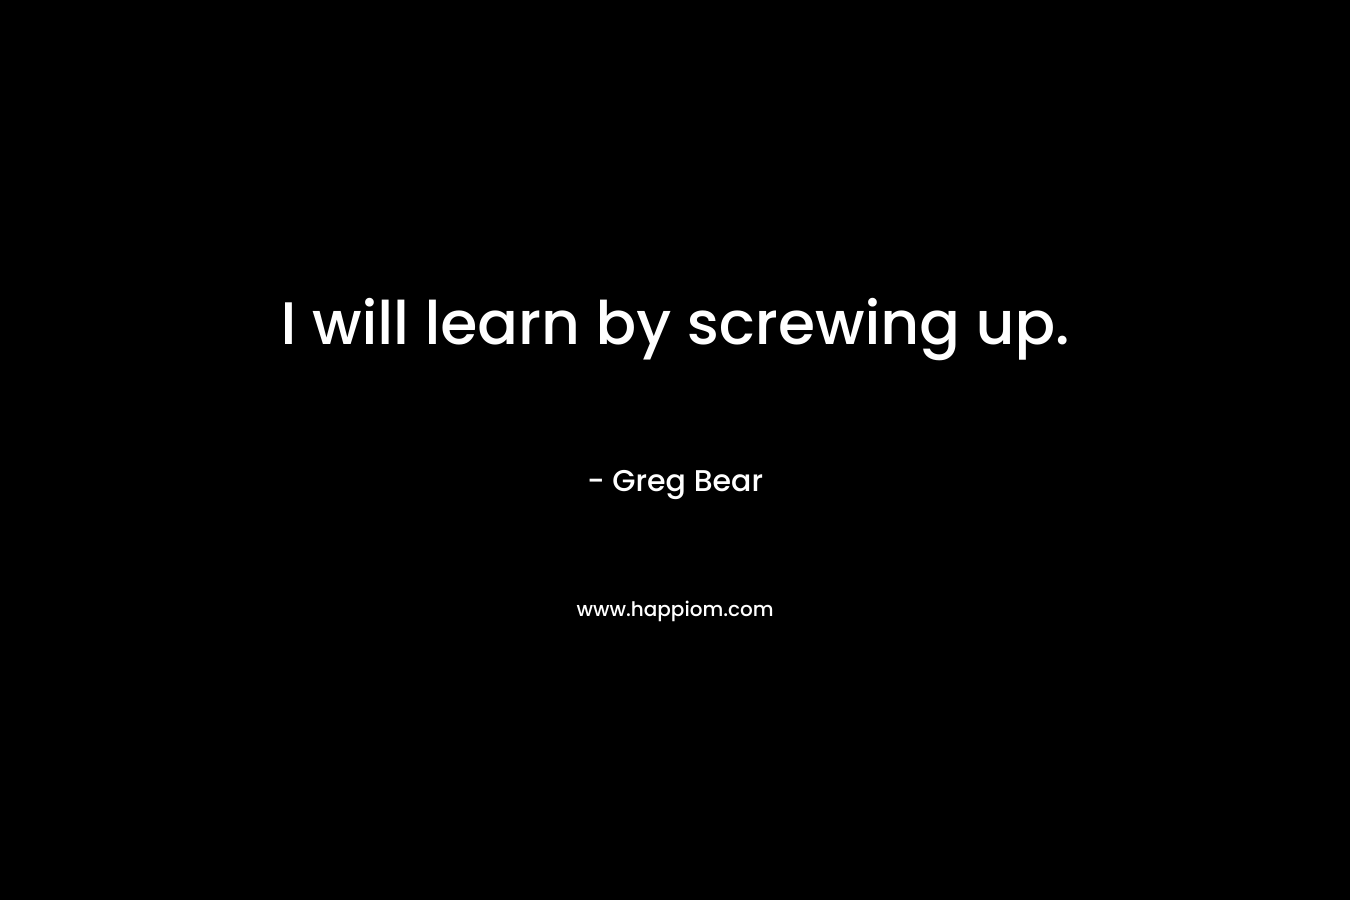 I will learn by screwing up.